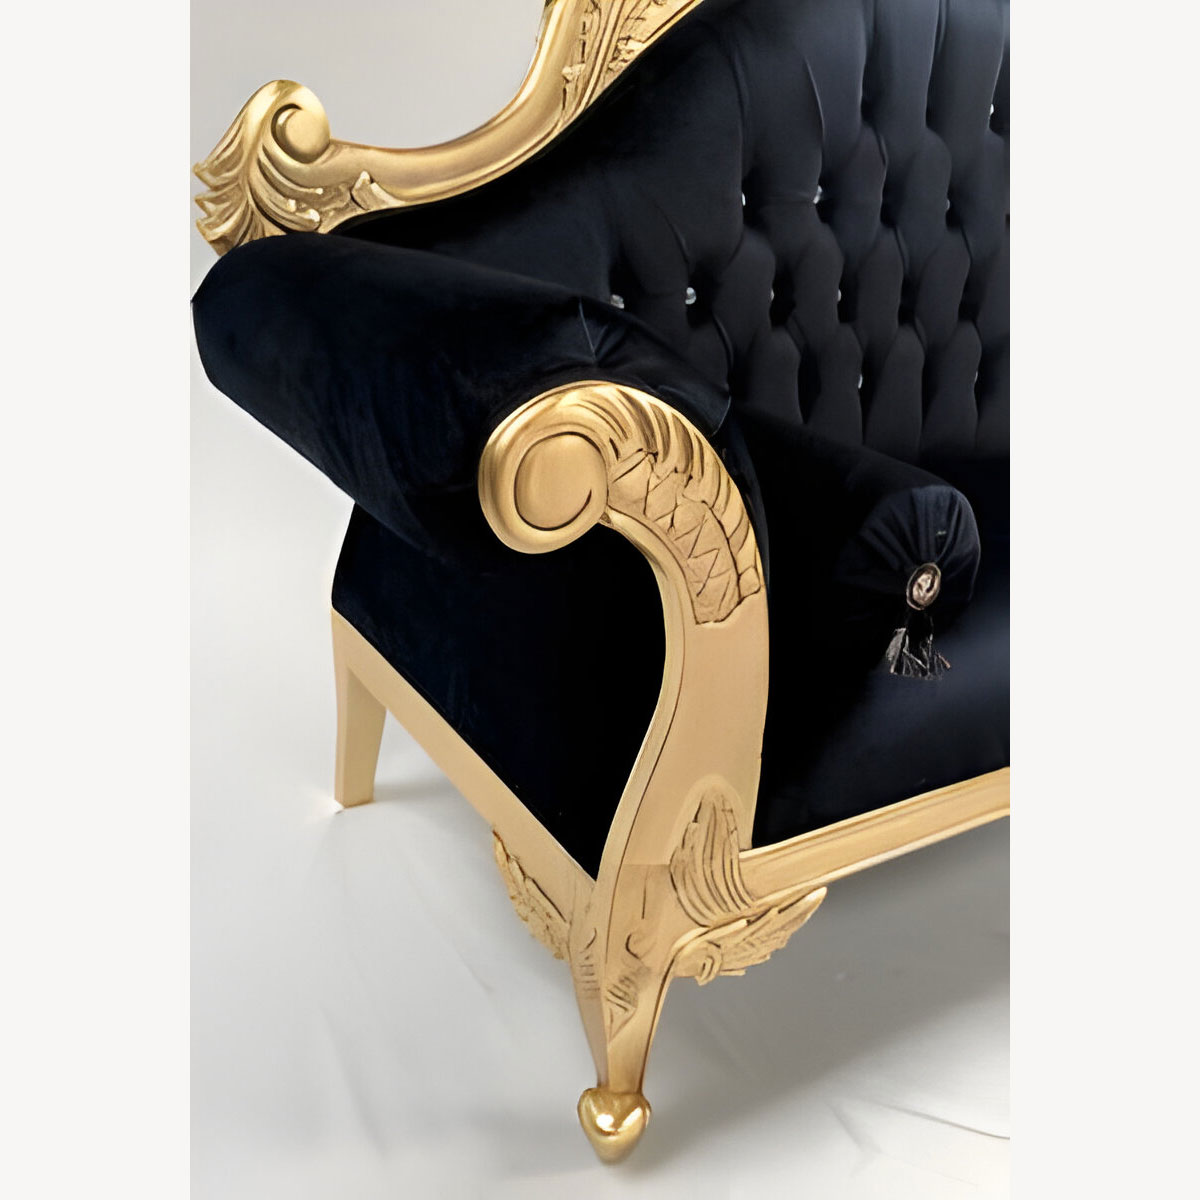 Charles Louis Cuddler Love Seat Chaise Sofa In Gold Leaf Frame With Black Velvet And Crystals 4 - Hampshire Barn Interiors - Charles Louis Cuddler Love Seat Chaise Sofa In Gold Leaf Frame With Black Velvet And Crystals -